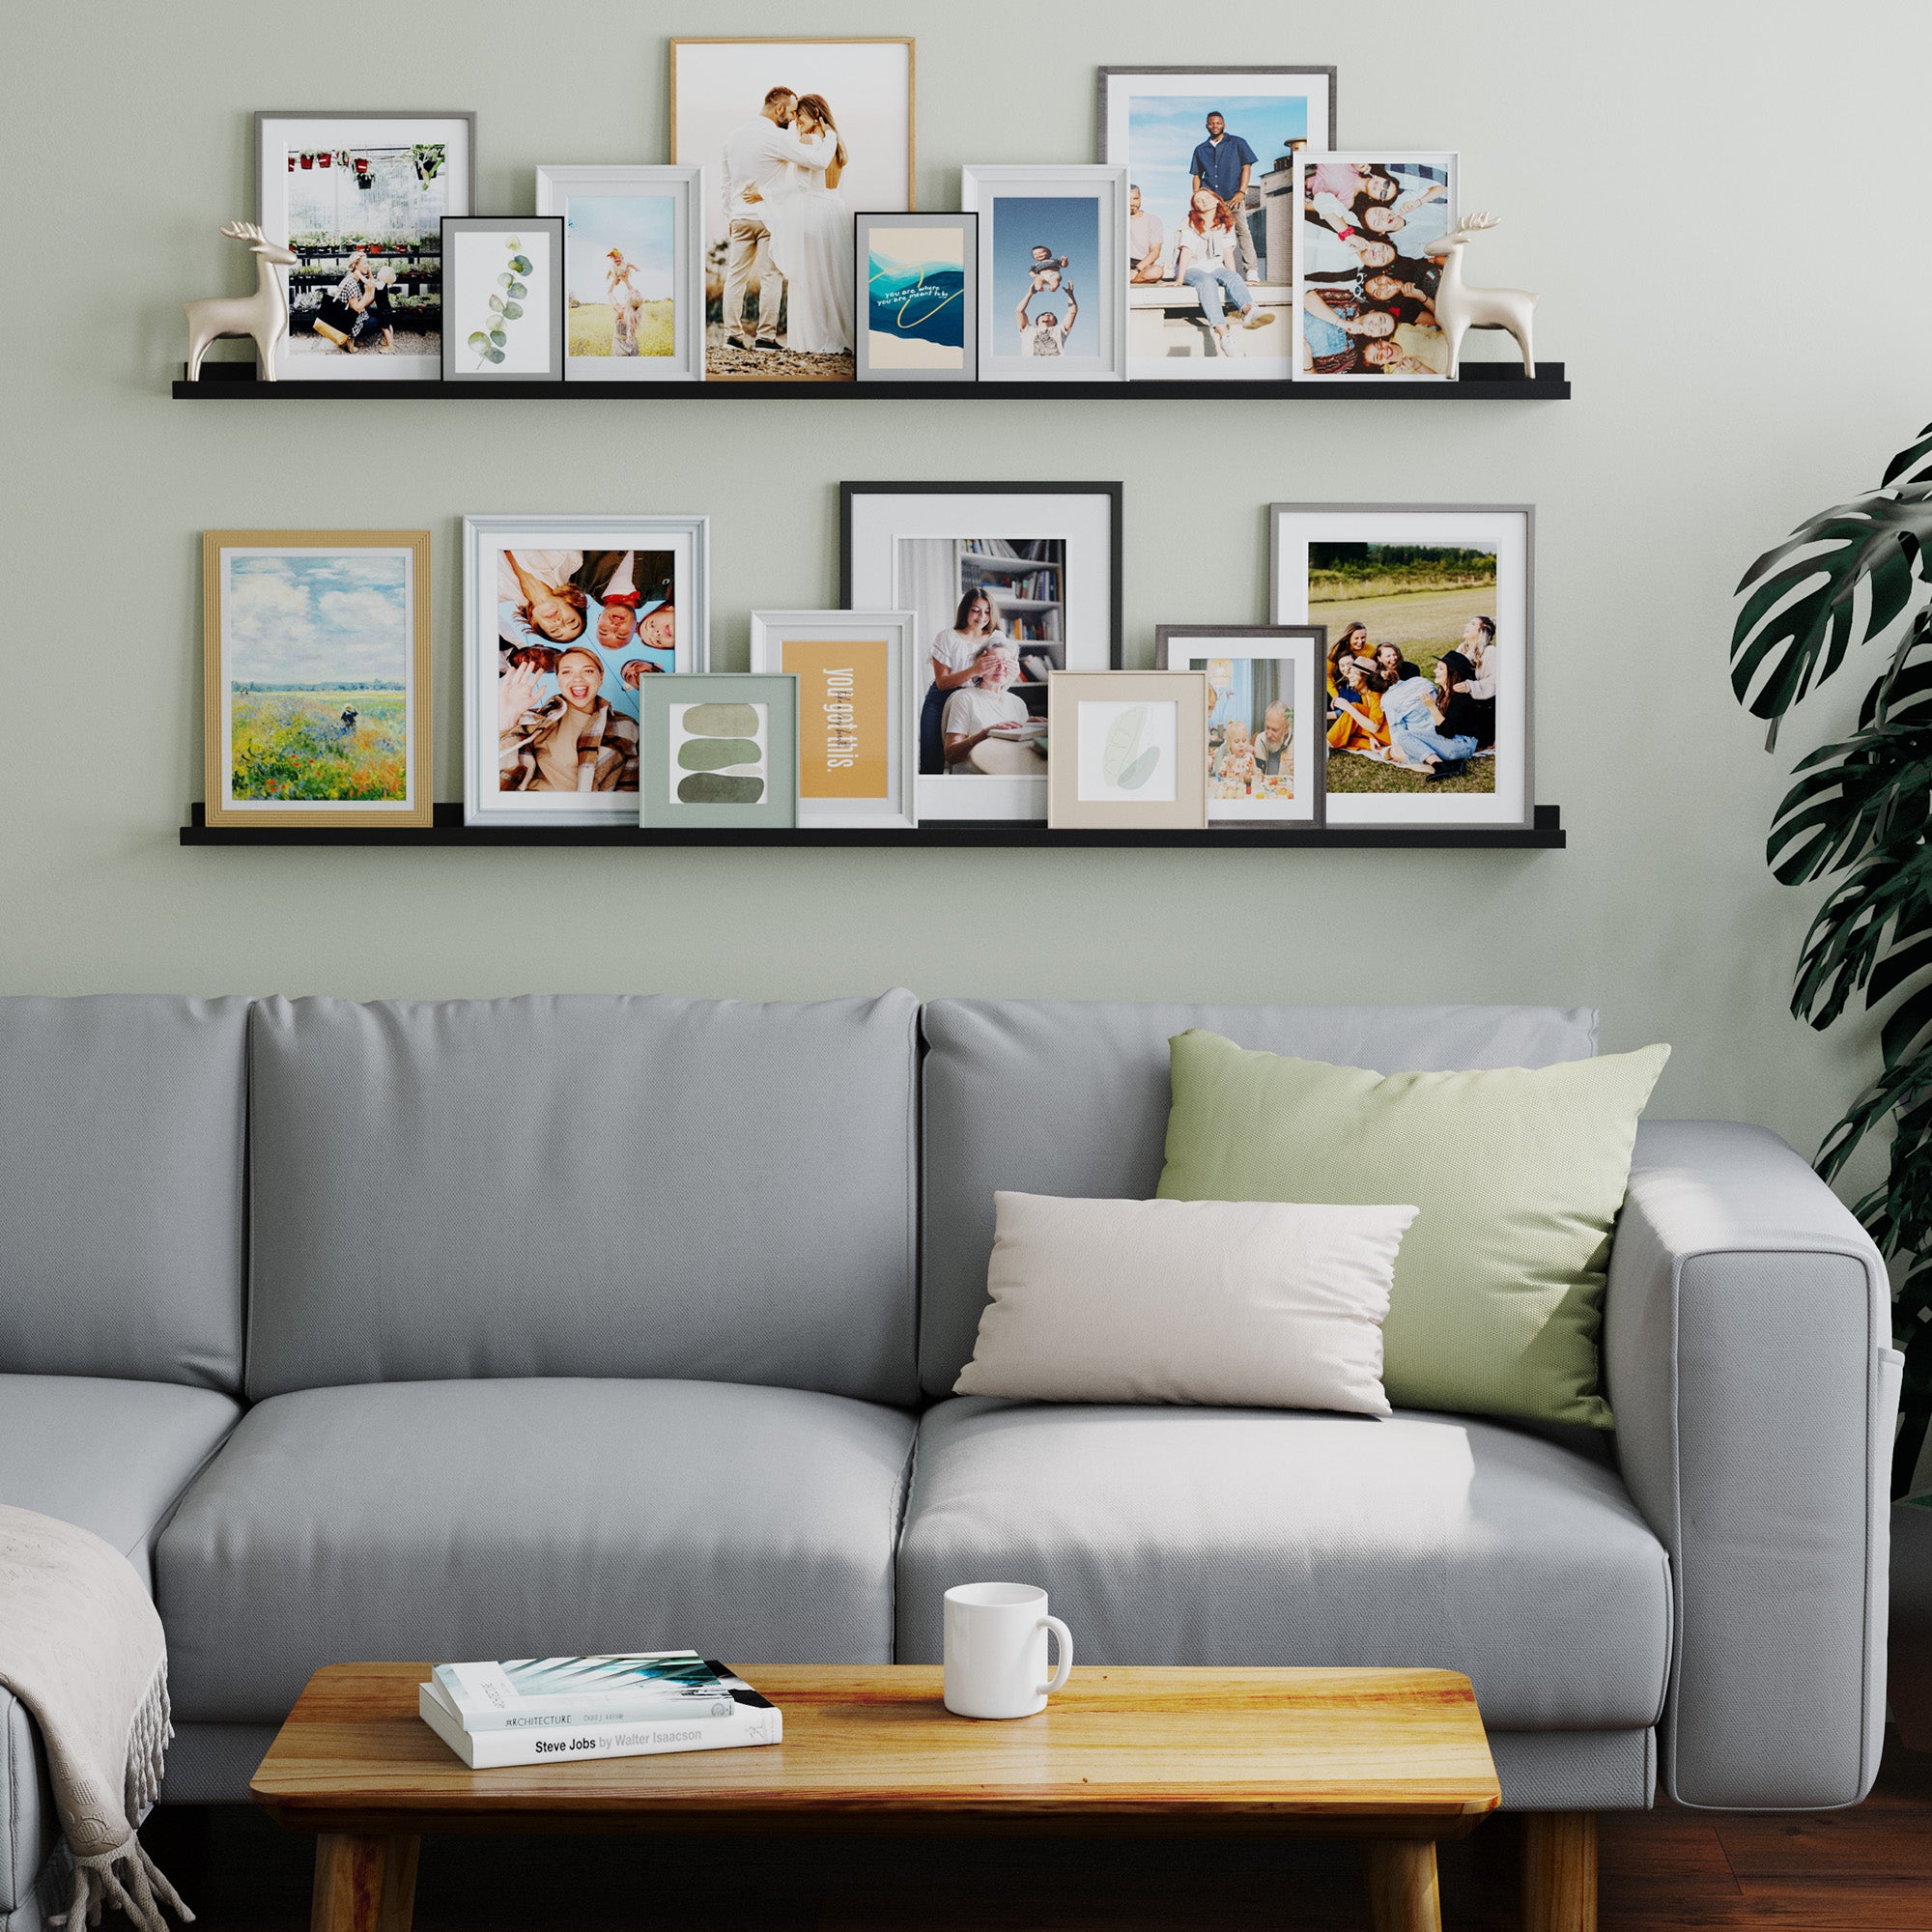 Living room with multiple photo frames on black shelves above a grey couch.